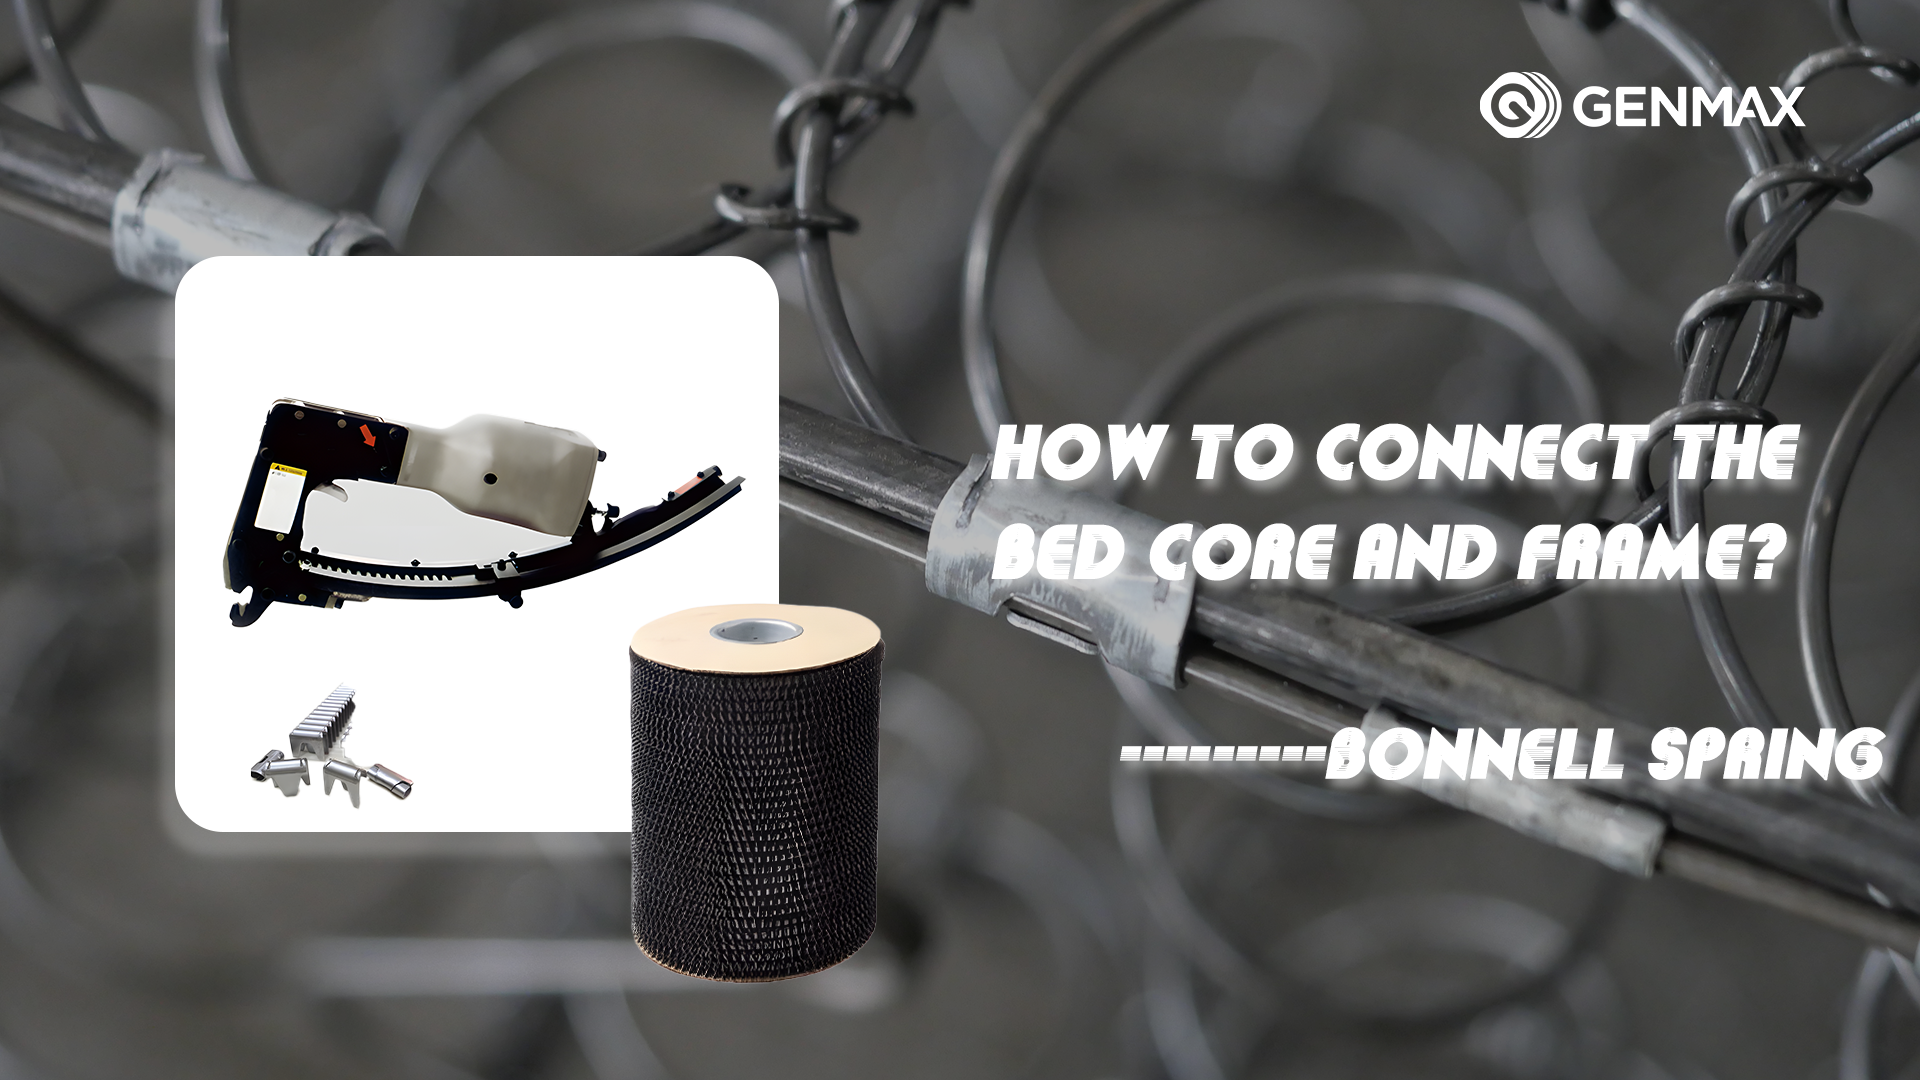 How To Connect The Bonell Bed Core And Frame?